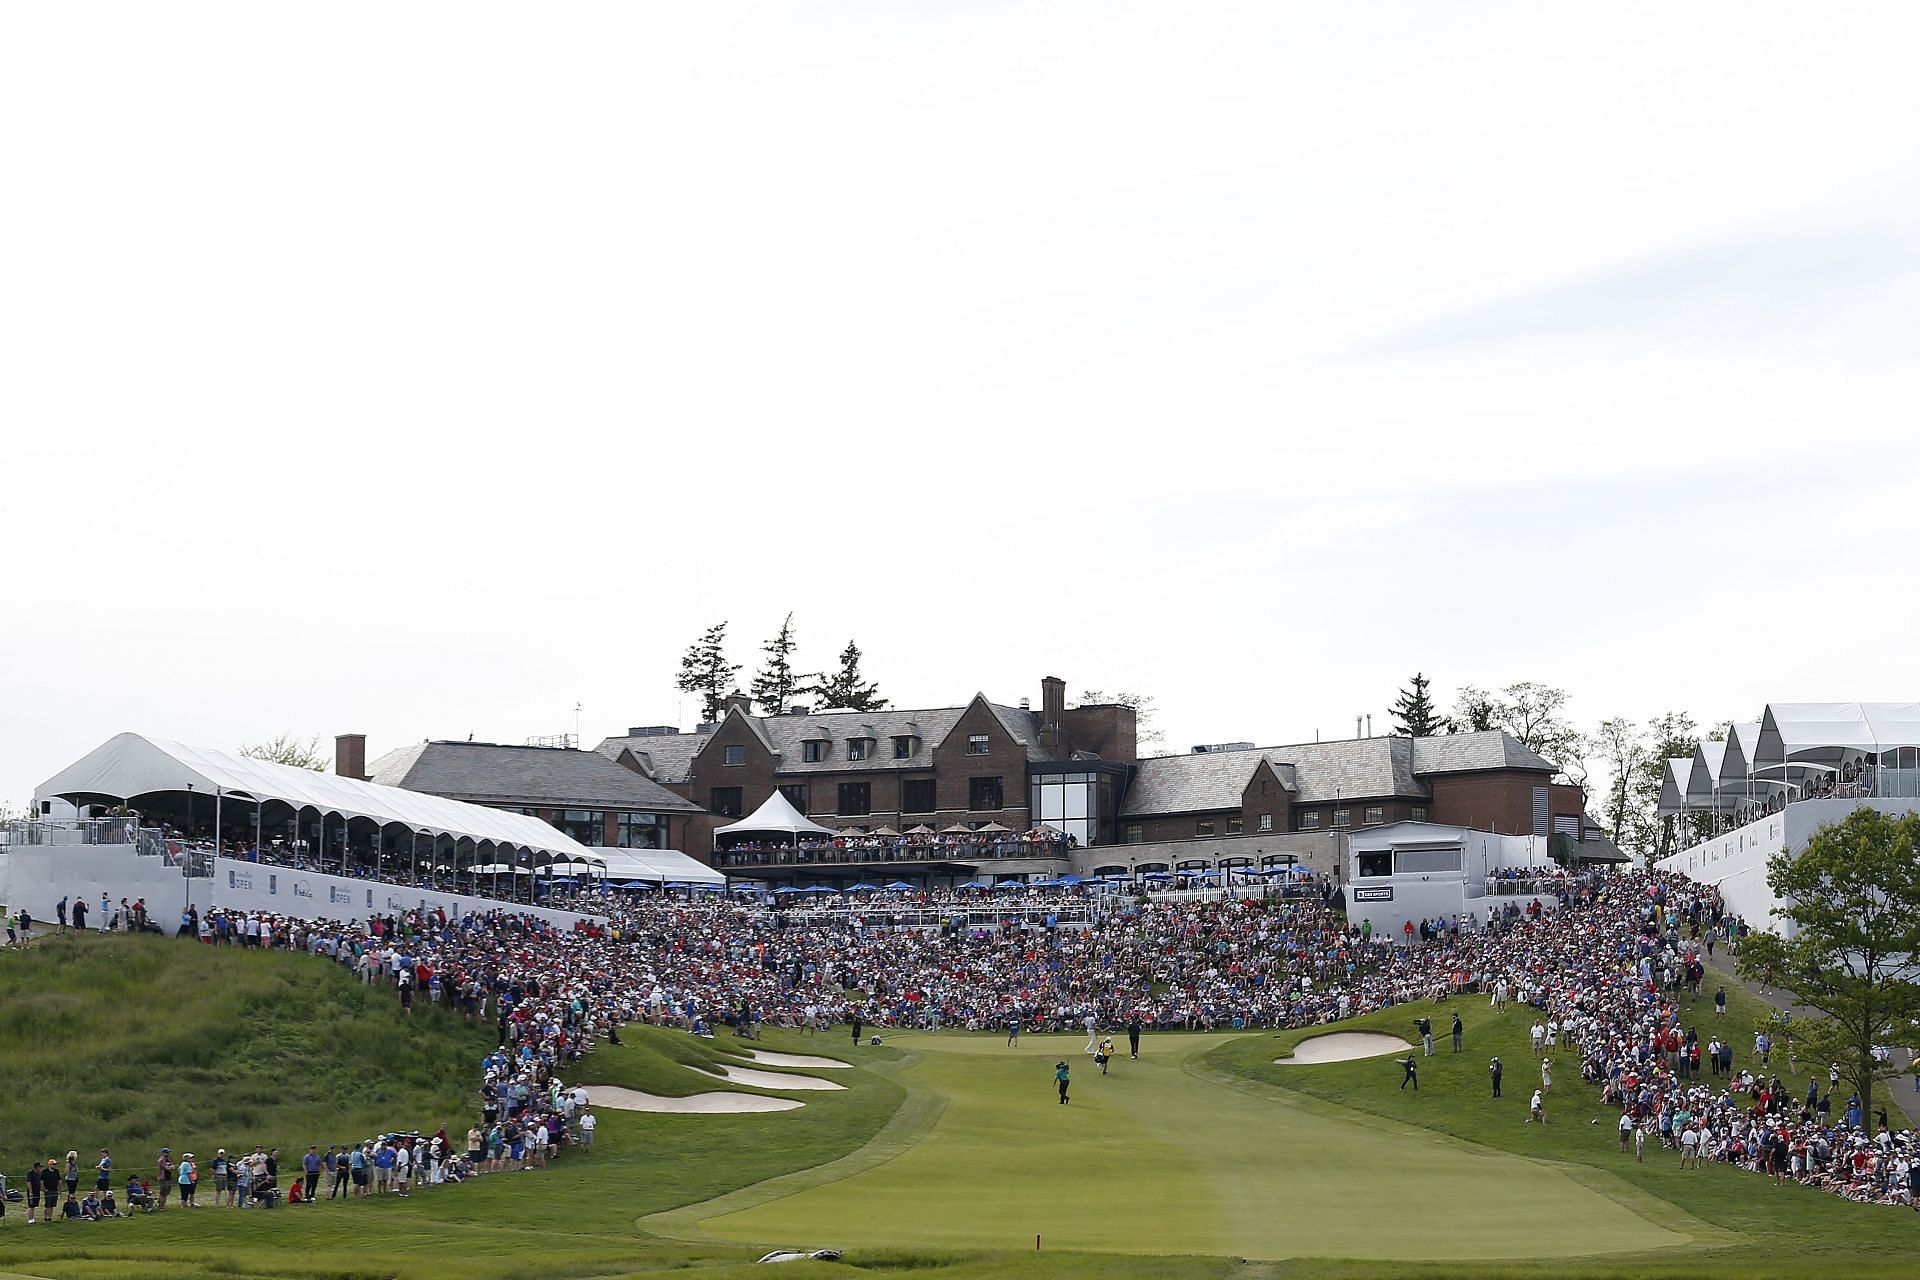 RBC Canadian Open - Final Round